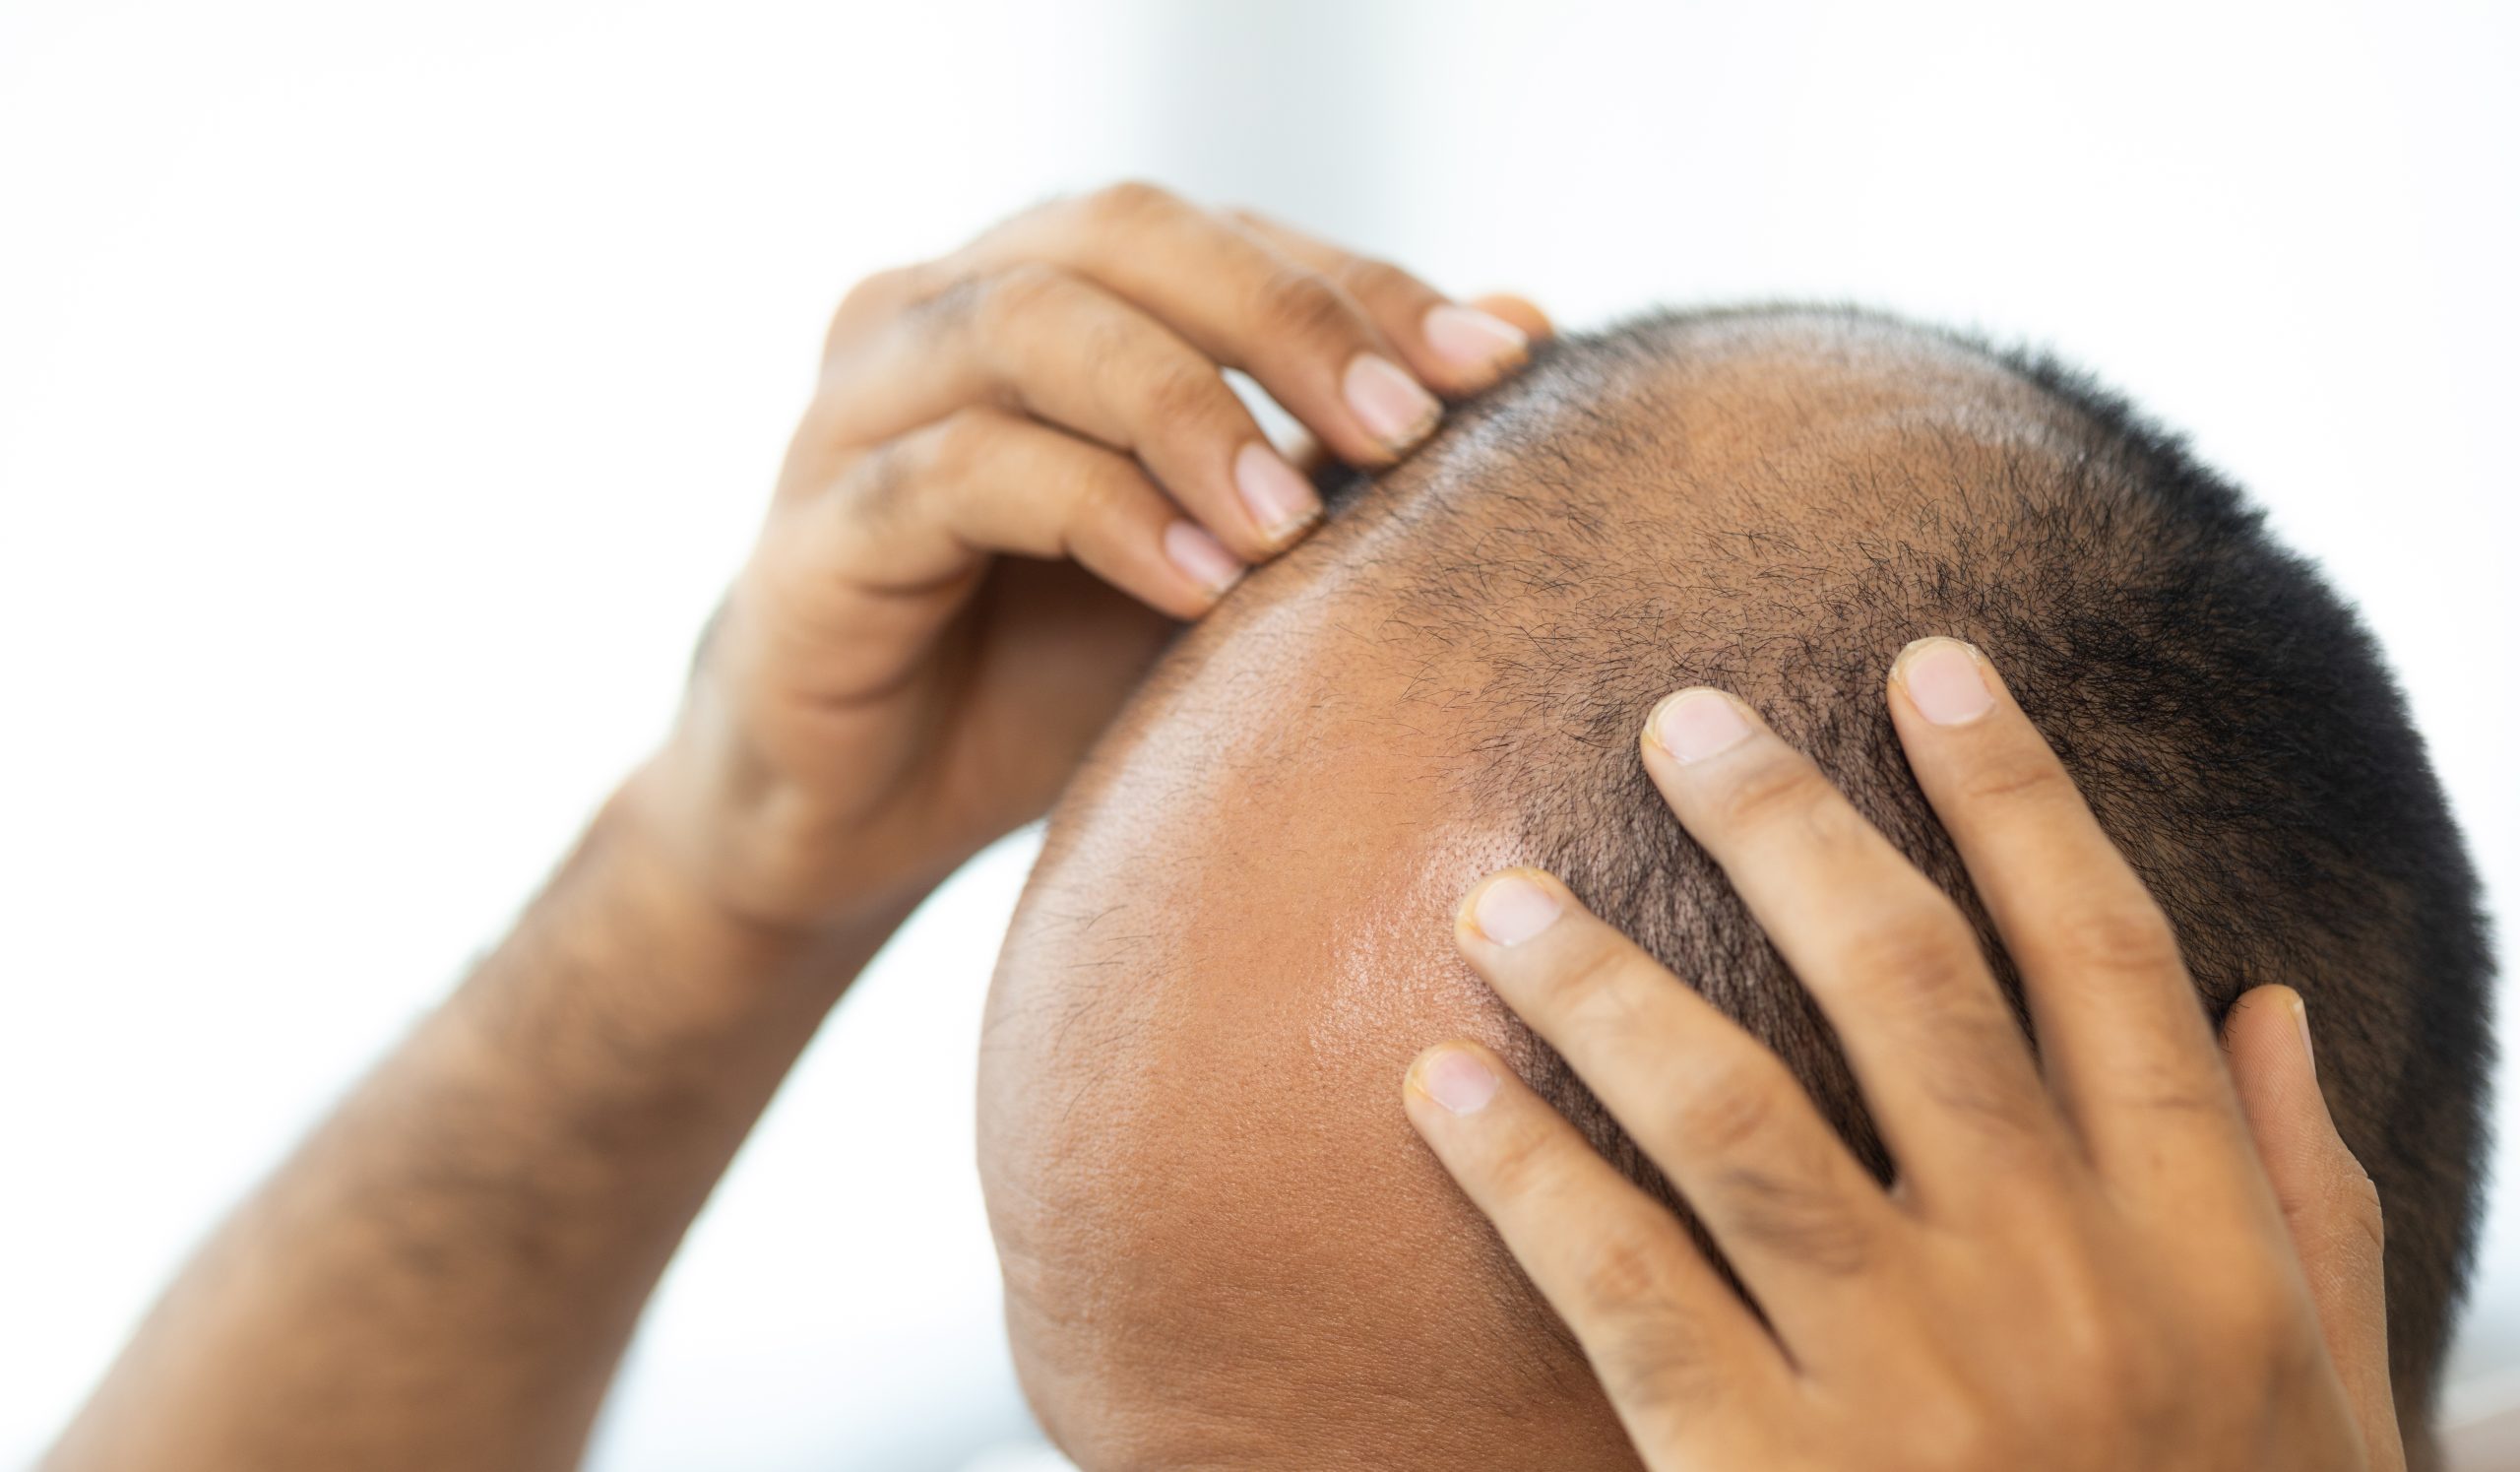 A man considering a hair transplant to restore his hairline